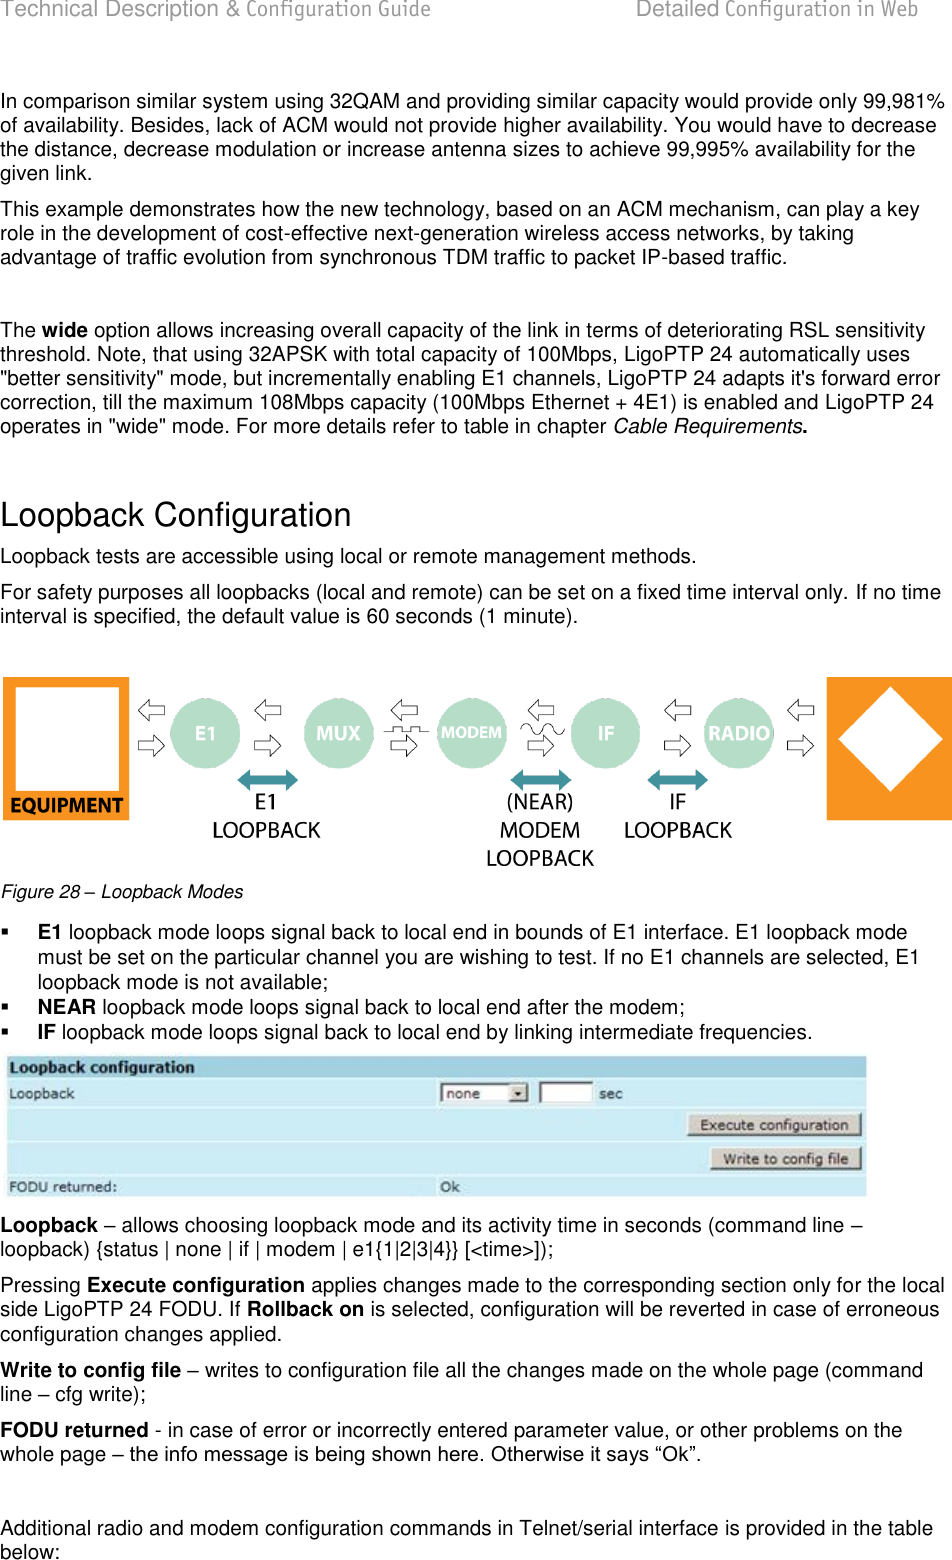 Technical Description &amp; Configuration Guide  Detailed Configuration in Web  LigoWave  Page 40 In comparison similar system using 32QAM and providing similar capacity would provide only 99,981% of availability. Besides, lack of ACM would not provide higher availability. You would have to decrease the distance, decrease modulation or increase antenna sizes to achieve 99,995% availability for the given link. This example demonstrates how the new technology, based on an ACM mechanism, can play a key role in the development of cost-effective next-generation wireless access networks, by taking advantage of traffic evolution from synchronous TDM traffic to packet IP-based traffic.  The wide option allows increasing overall capacity of the link in terms of deteriorating RSL sensitivity threshold. Note, that using 32APSK with total capacity of 100Mbps, LigoPTP 24 automatically uses &quot;better sensitivity&quot; mode, but incrementally enabling E1 channels, LigoPTP 24 adapts it&apos;s forward error correction, till the maximum 108Mbps capacity (100Mbps Ethernet + 4E1) is enabled and LigoPTP 24 operates in &quot;wide&quot; mode. For more details refer to table in chapter Cable Requirements.  Loopback Configuration Loopback tests are accessible using local or remote management methods. For safety purposes all loopbacks (local and remote) can be set on a fixed time interval only. If no time interval is specified, the default value is 60 seconds (1 minute).   Figure 28 – Loopback Modes  E1 loopback mode loops signal back to local end in bounds of E1 interface. E1 loopback mode must be set on the particular channel you are wishing to test. If no E1 channels are selected, E1 loopback mode is not available;  NEAR loopback mode loops signal back to local end after the modem;  IF loopback mode loops signal back to local end by linking intermediate frequencies.  Loopback  allows choosing loopback mode and its activity time in seconds (command line  loopback) {status | none | if | modem | e1{1|2|3|4}} [&lt;time&gt;]); Pressing Execute configuration applies changes made to the corresponding section only for the local side LigoPTP 24 FODU. If Rollback on is selected, configuration will be reverted in case of erroneous configuration changes applied. Write to config file  writes to configuration file all the changes made on the whole page (command line  cfg write); FODU returned - in case of error or incorrectly entered parameter value, or other problems on the whole page    Additional radio and modem configuration commands in Telnet/serial interface is provided in the table below: 